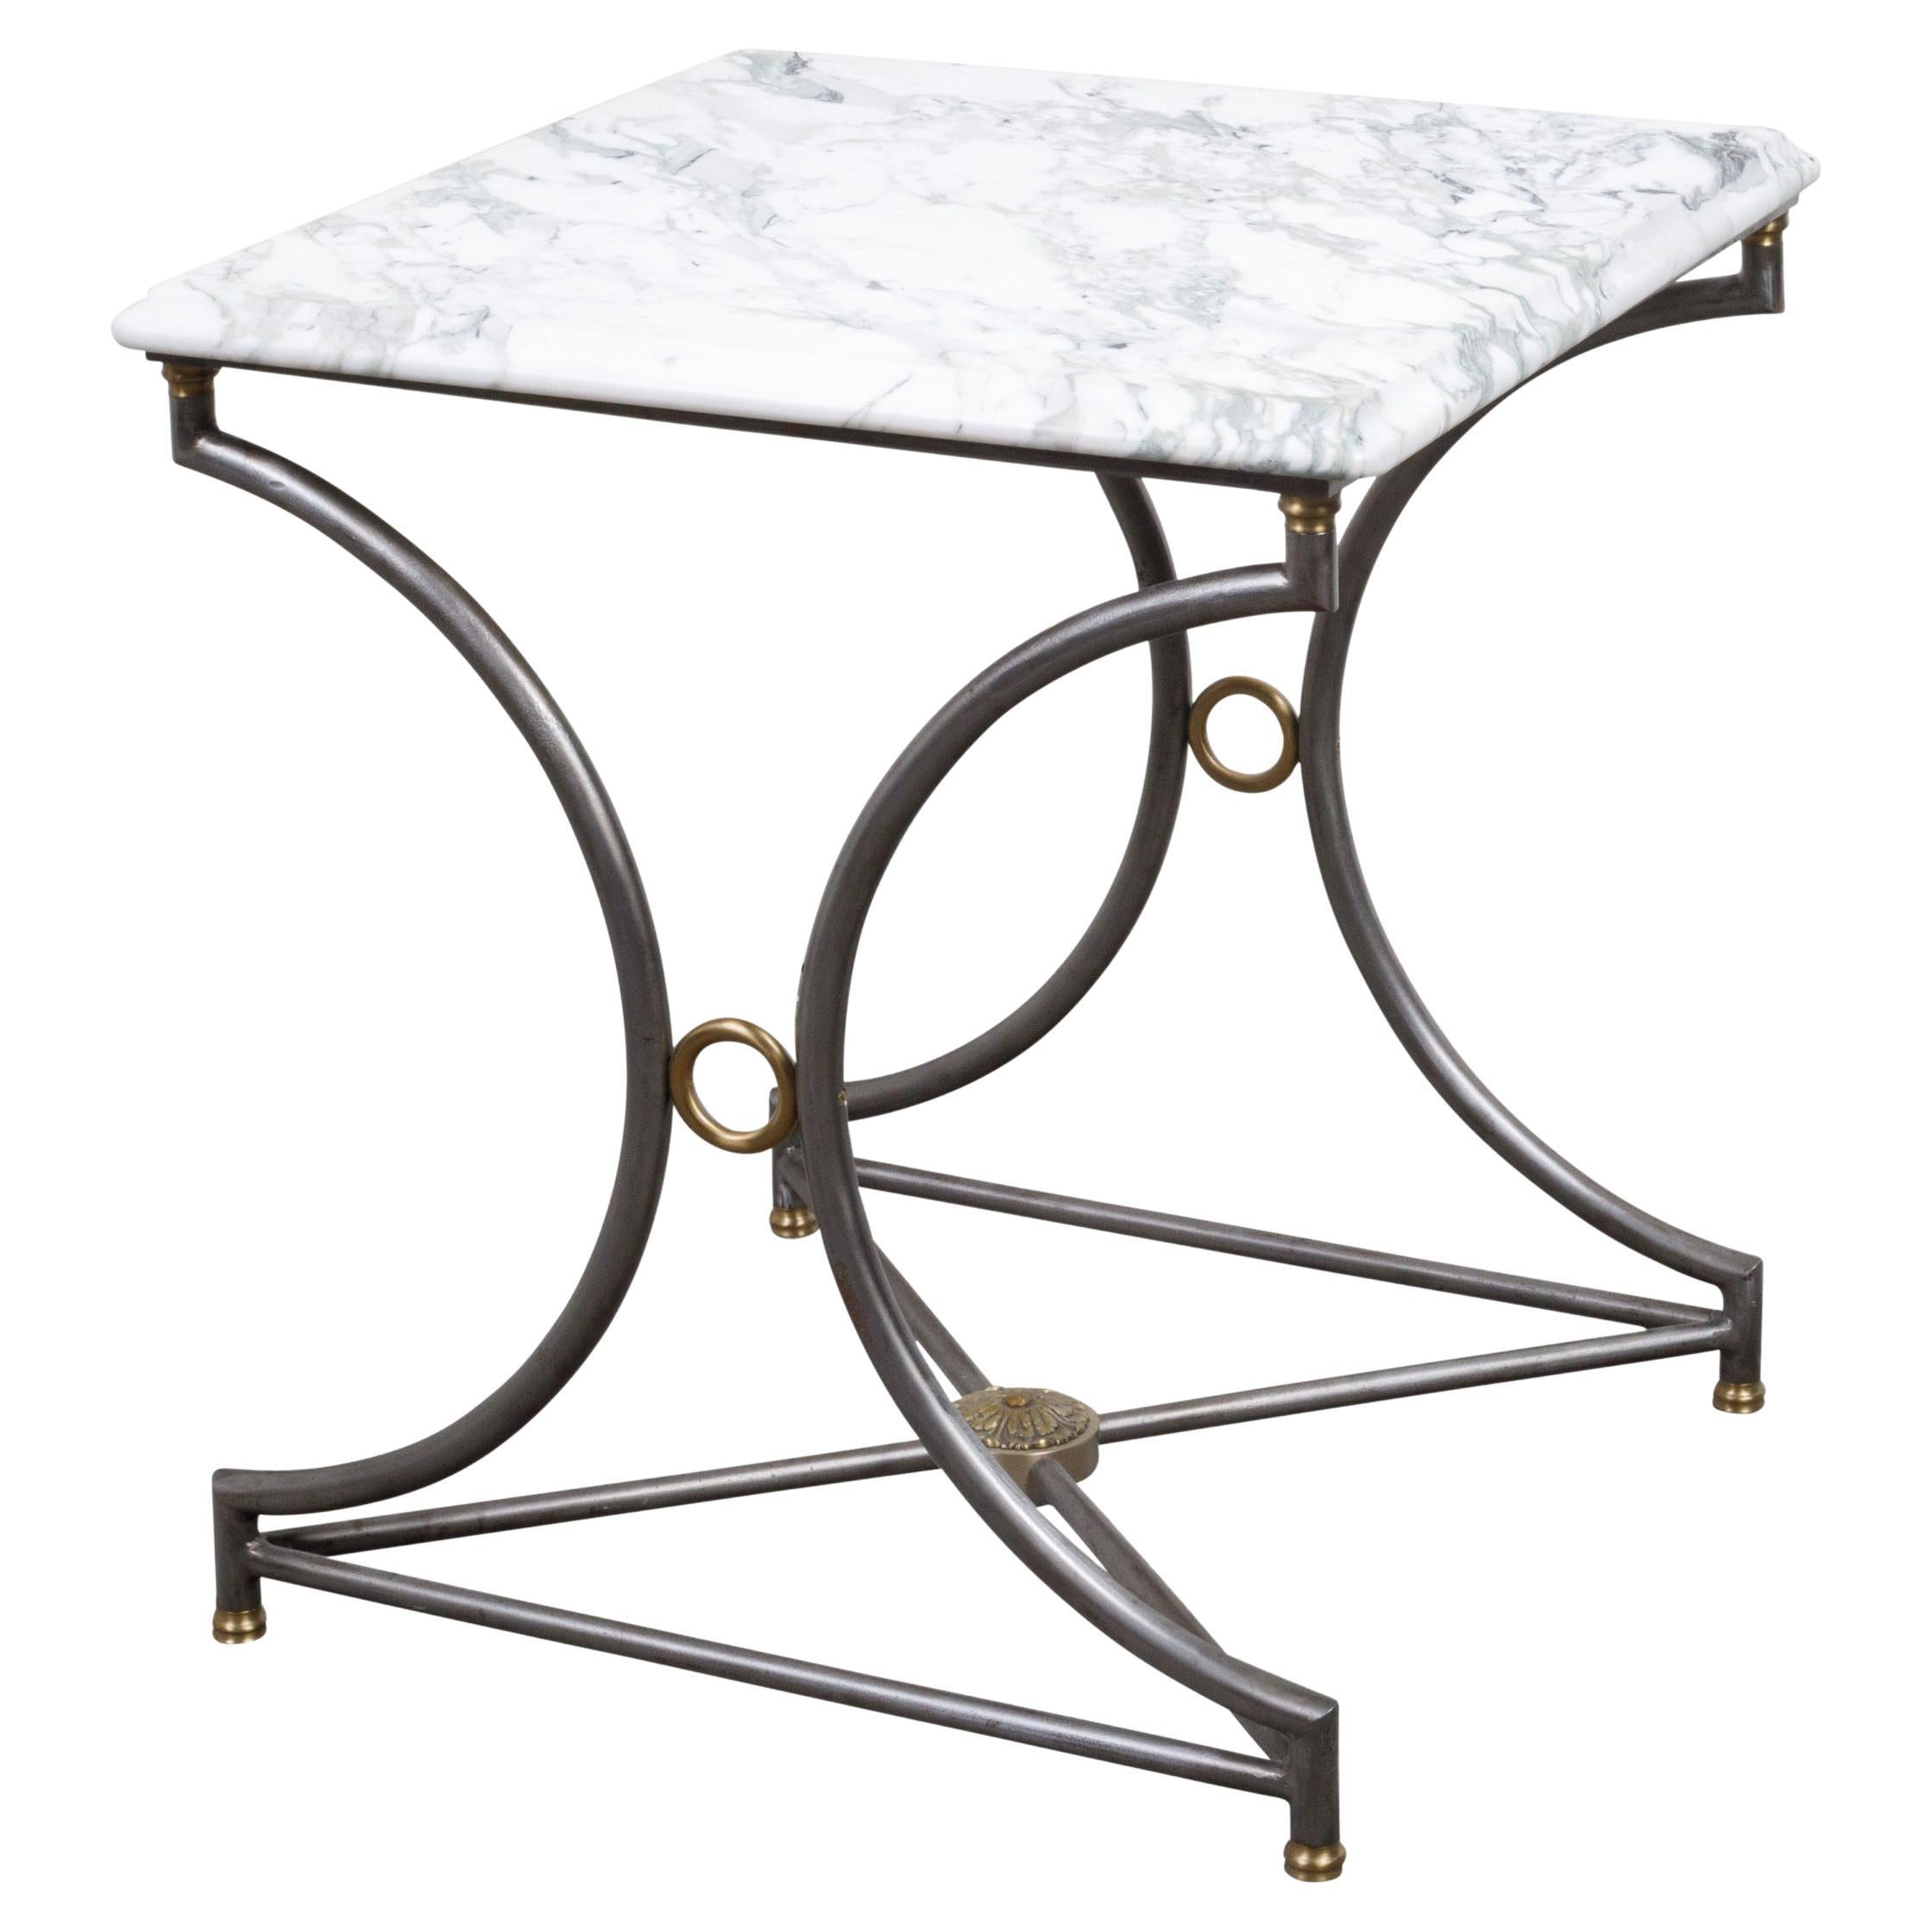 French Mid-Century Steel and Bronze Console Table with White Veined Marble Top